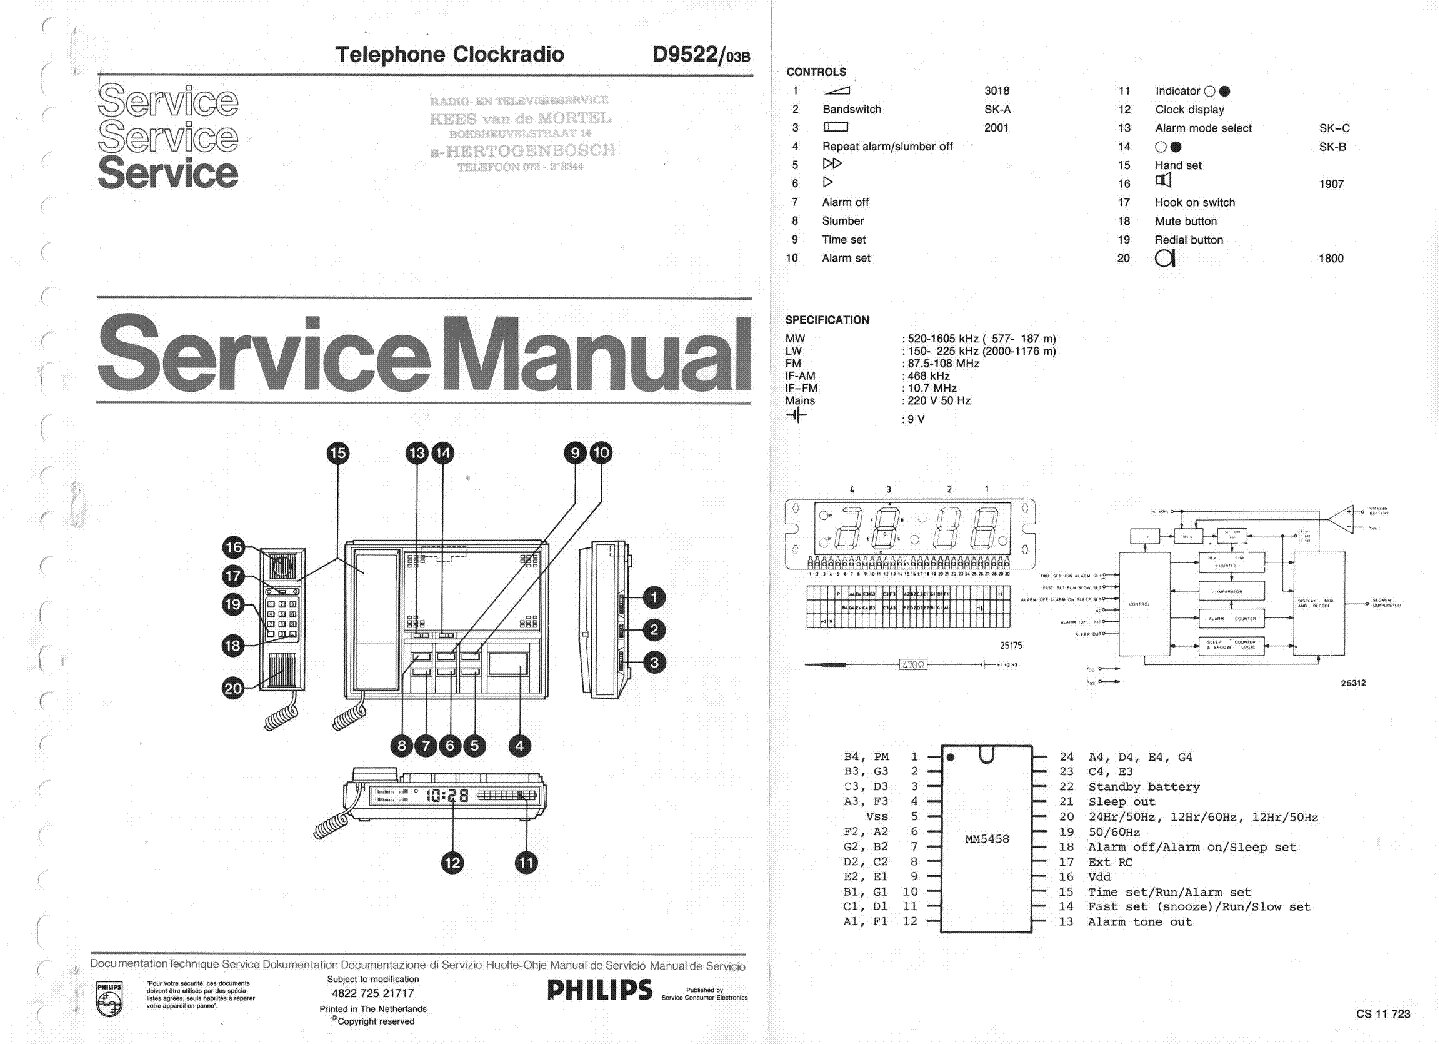 PHILIPS D9522-03B SM service manual (1st page)